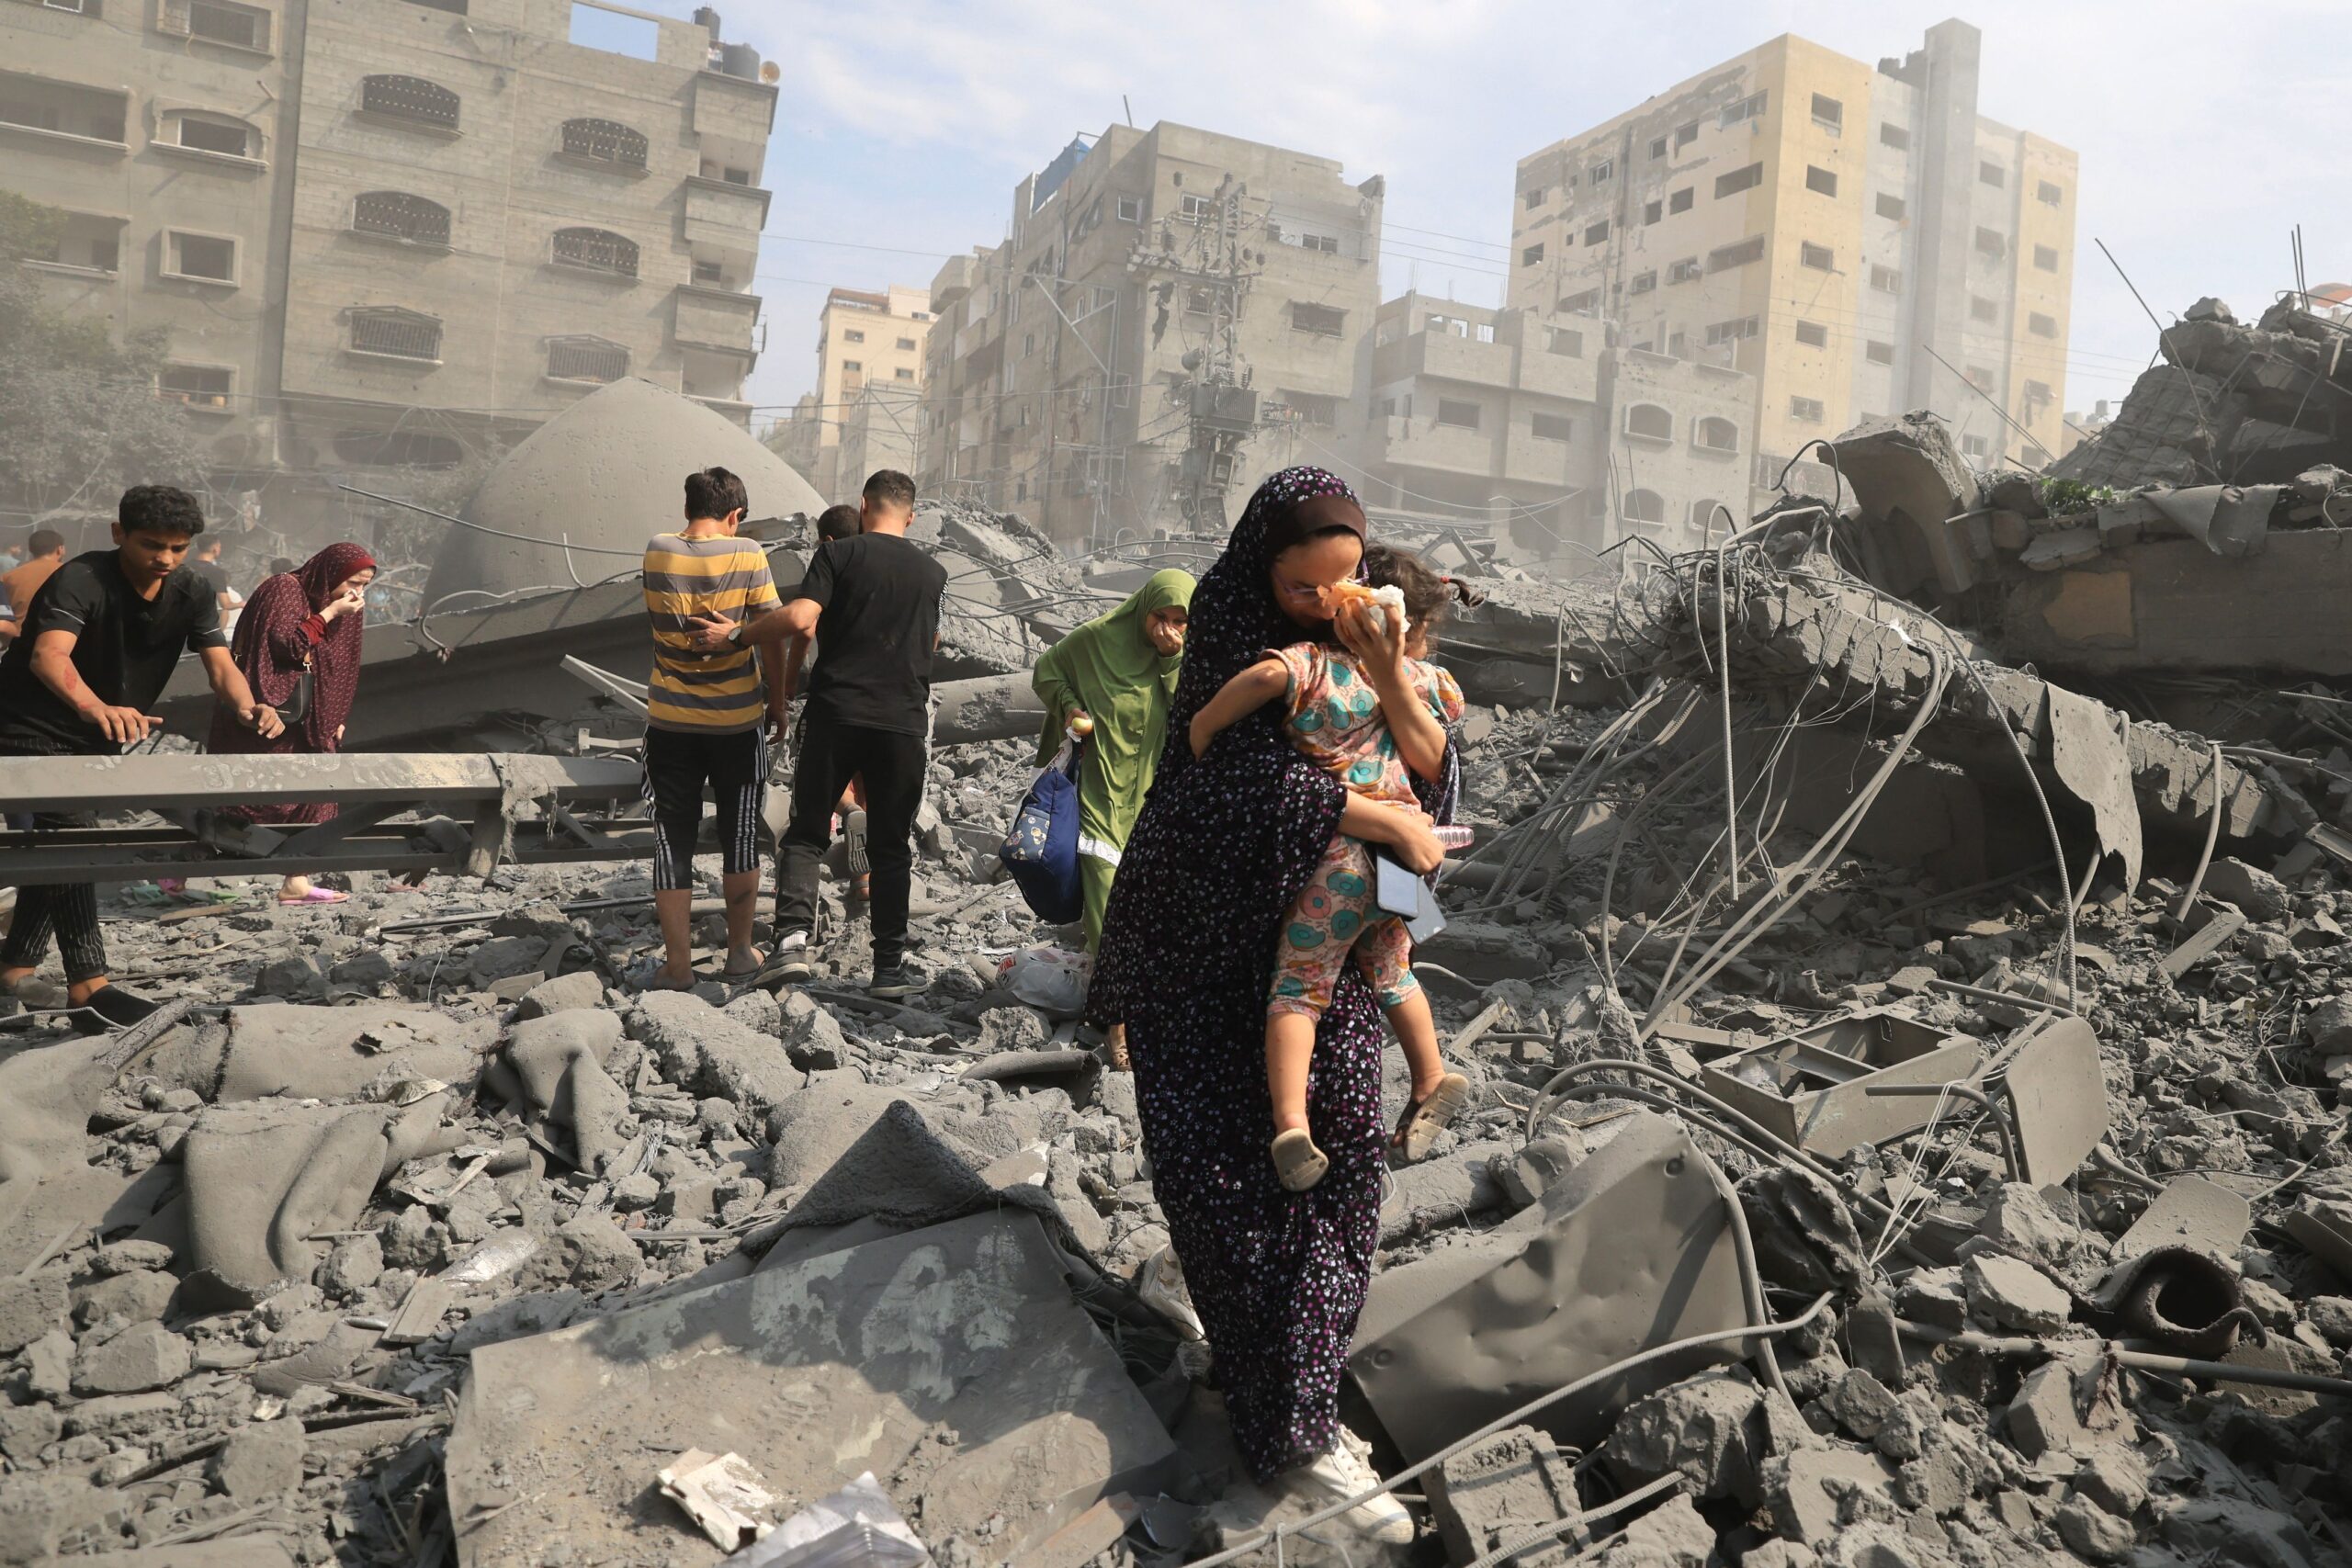 Israel defying ICJ ruling to prevent genocide by failing to allow adequate humanitarian aid to reach Gaza